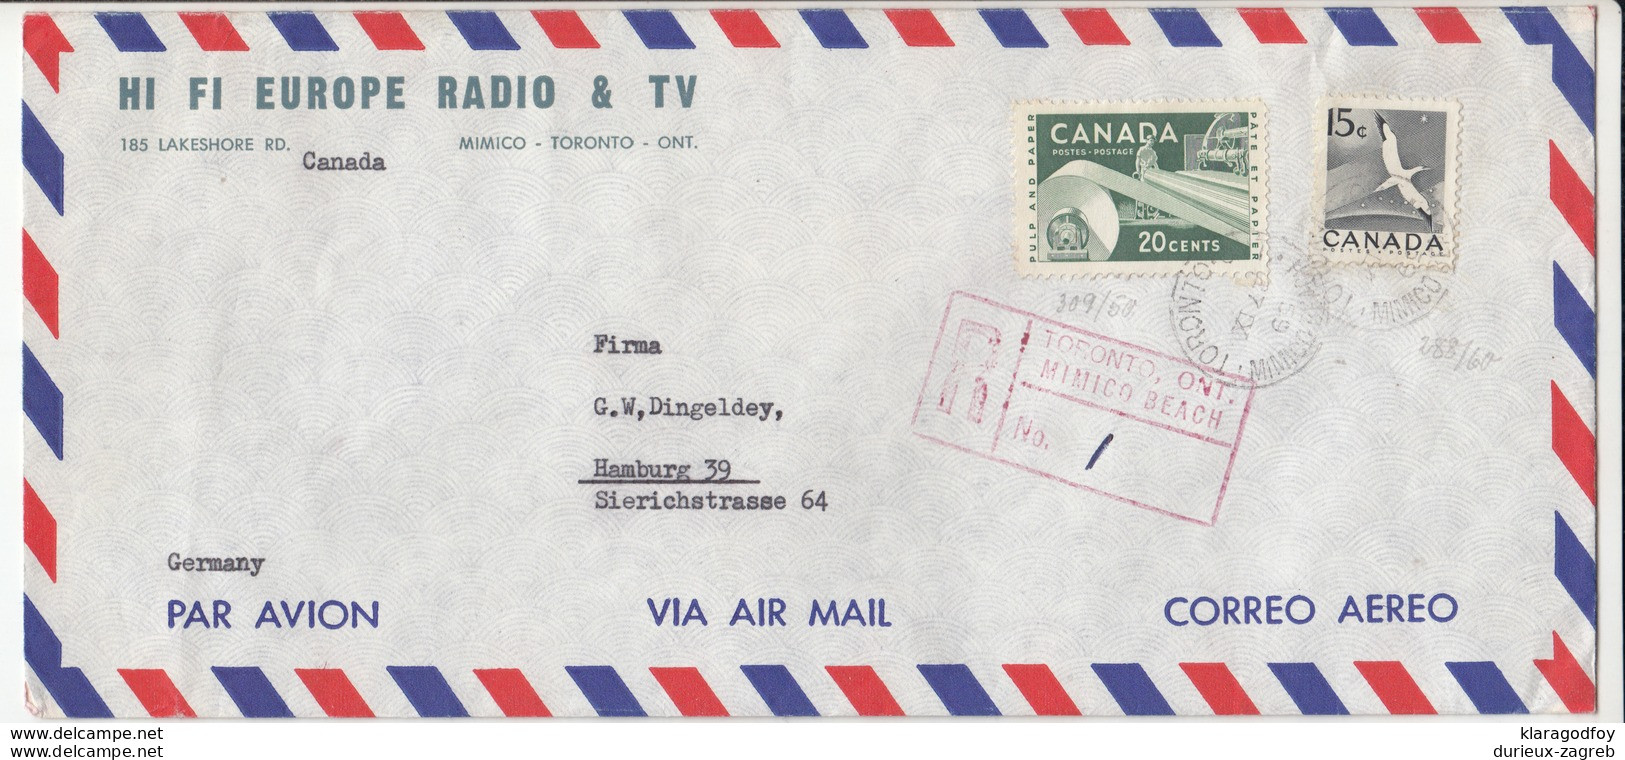 Canada, Hi Fi Europe Radio & TV Airmail Letter Cover Registered Travelled 1965 Toronto Pmk B180205 - Covers & Documents